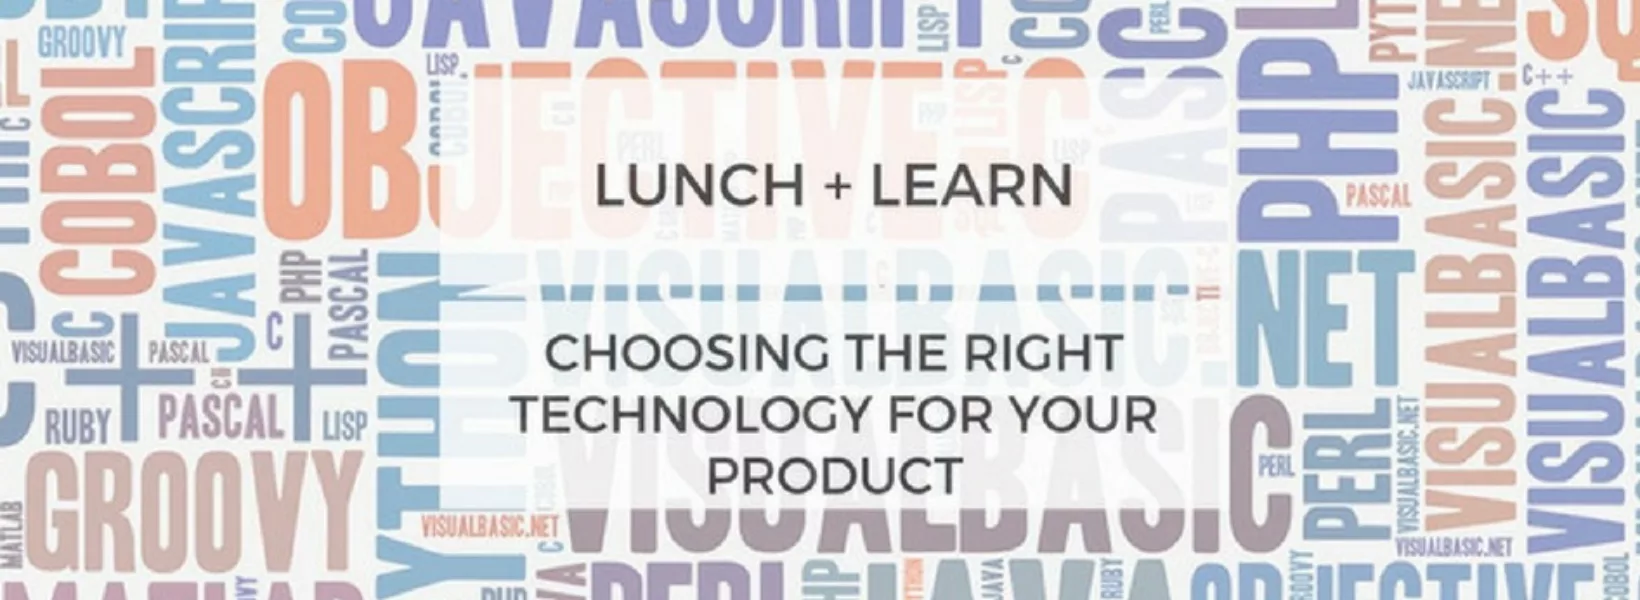 lunch + learn: choosing the right technology for your product